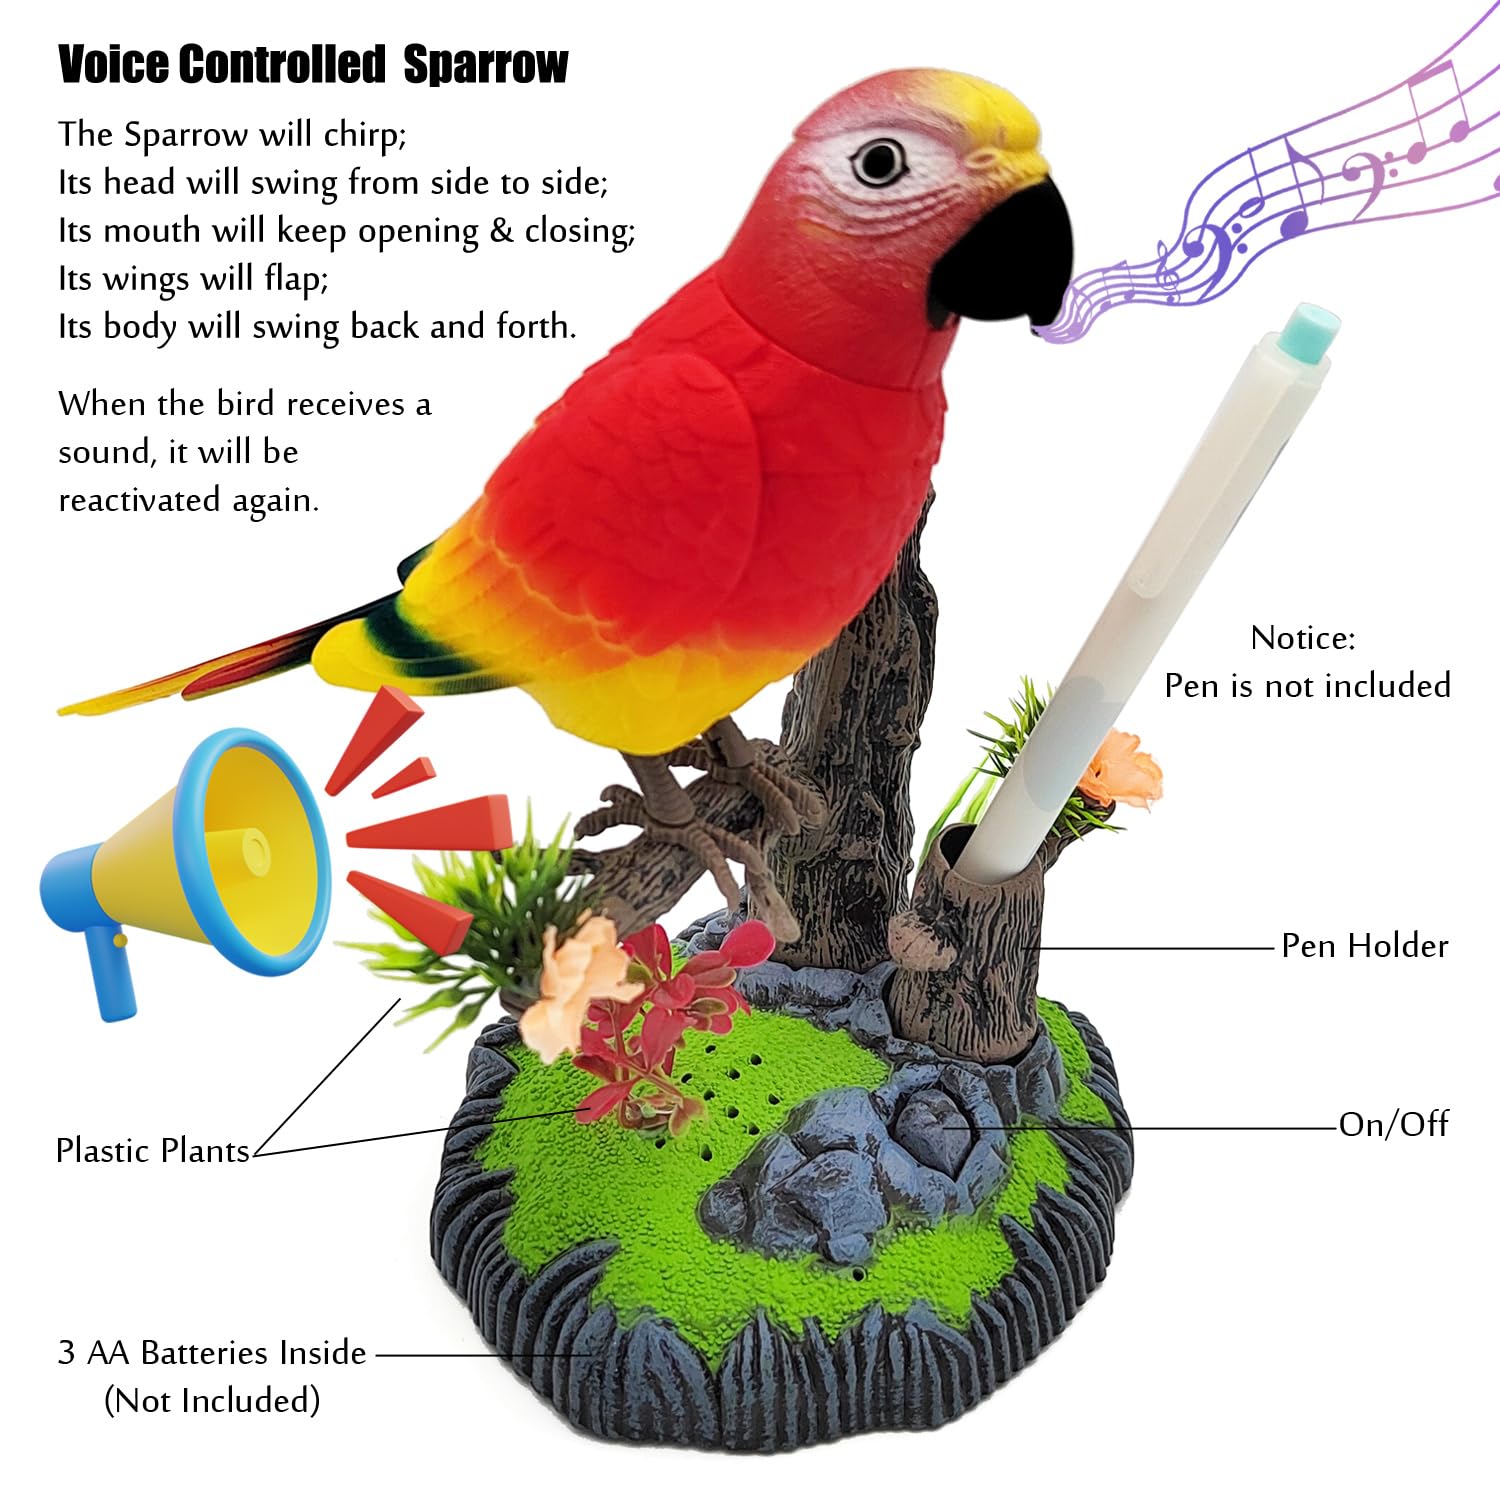 Tipmant Electronic Bird Toys Electric Parrots Animal Pets Move Chirp Realistic Home Office Room Decoration Kids Birthday Gifts (Red)